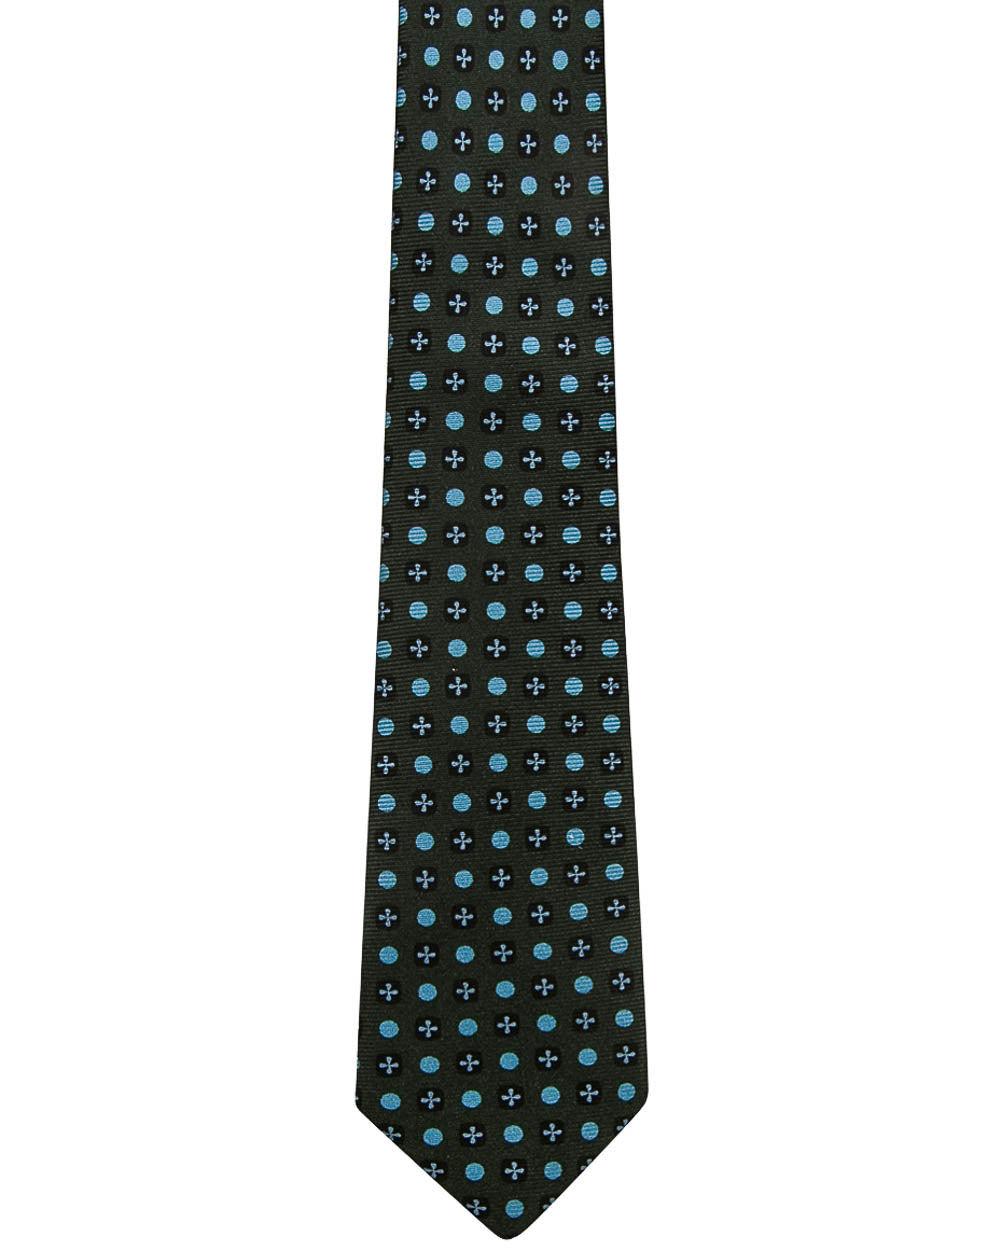 Army Green and Light Blue Geometric Tie